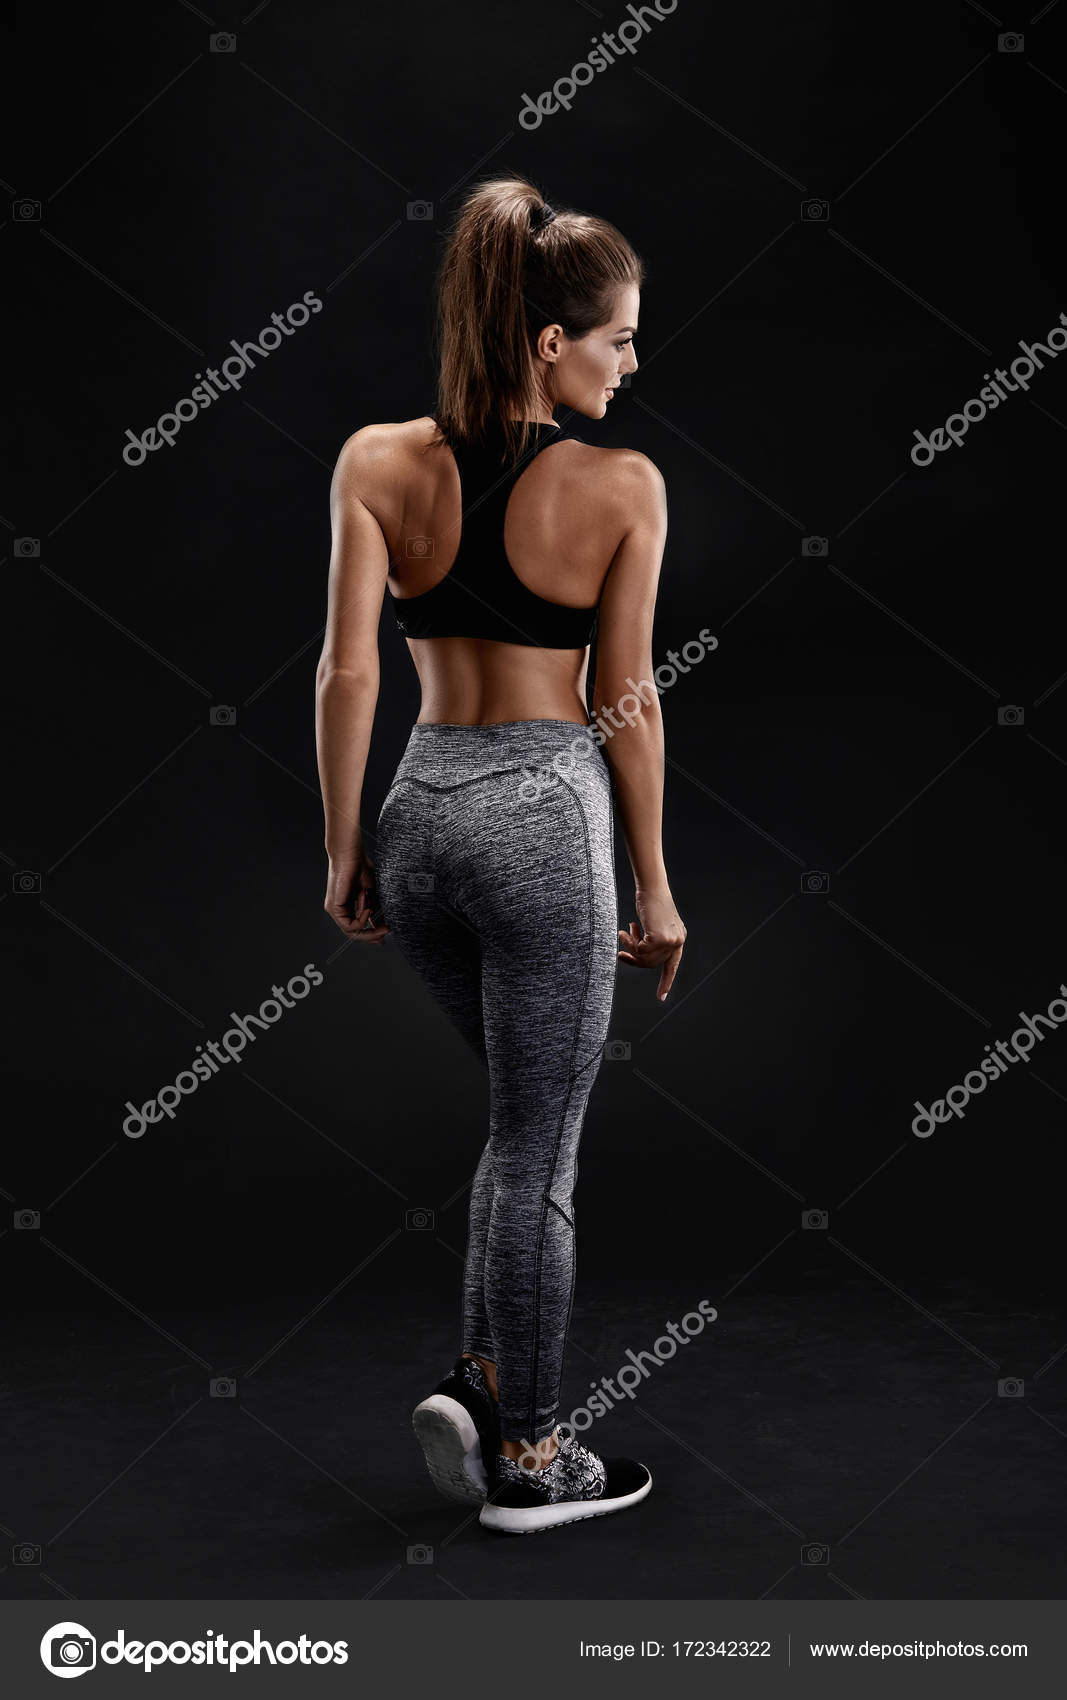 Pretty woman poses in her athletic shorts and top – Jacob Lund Photography  Store- premium stock photo